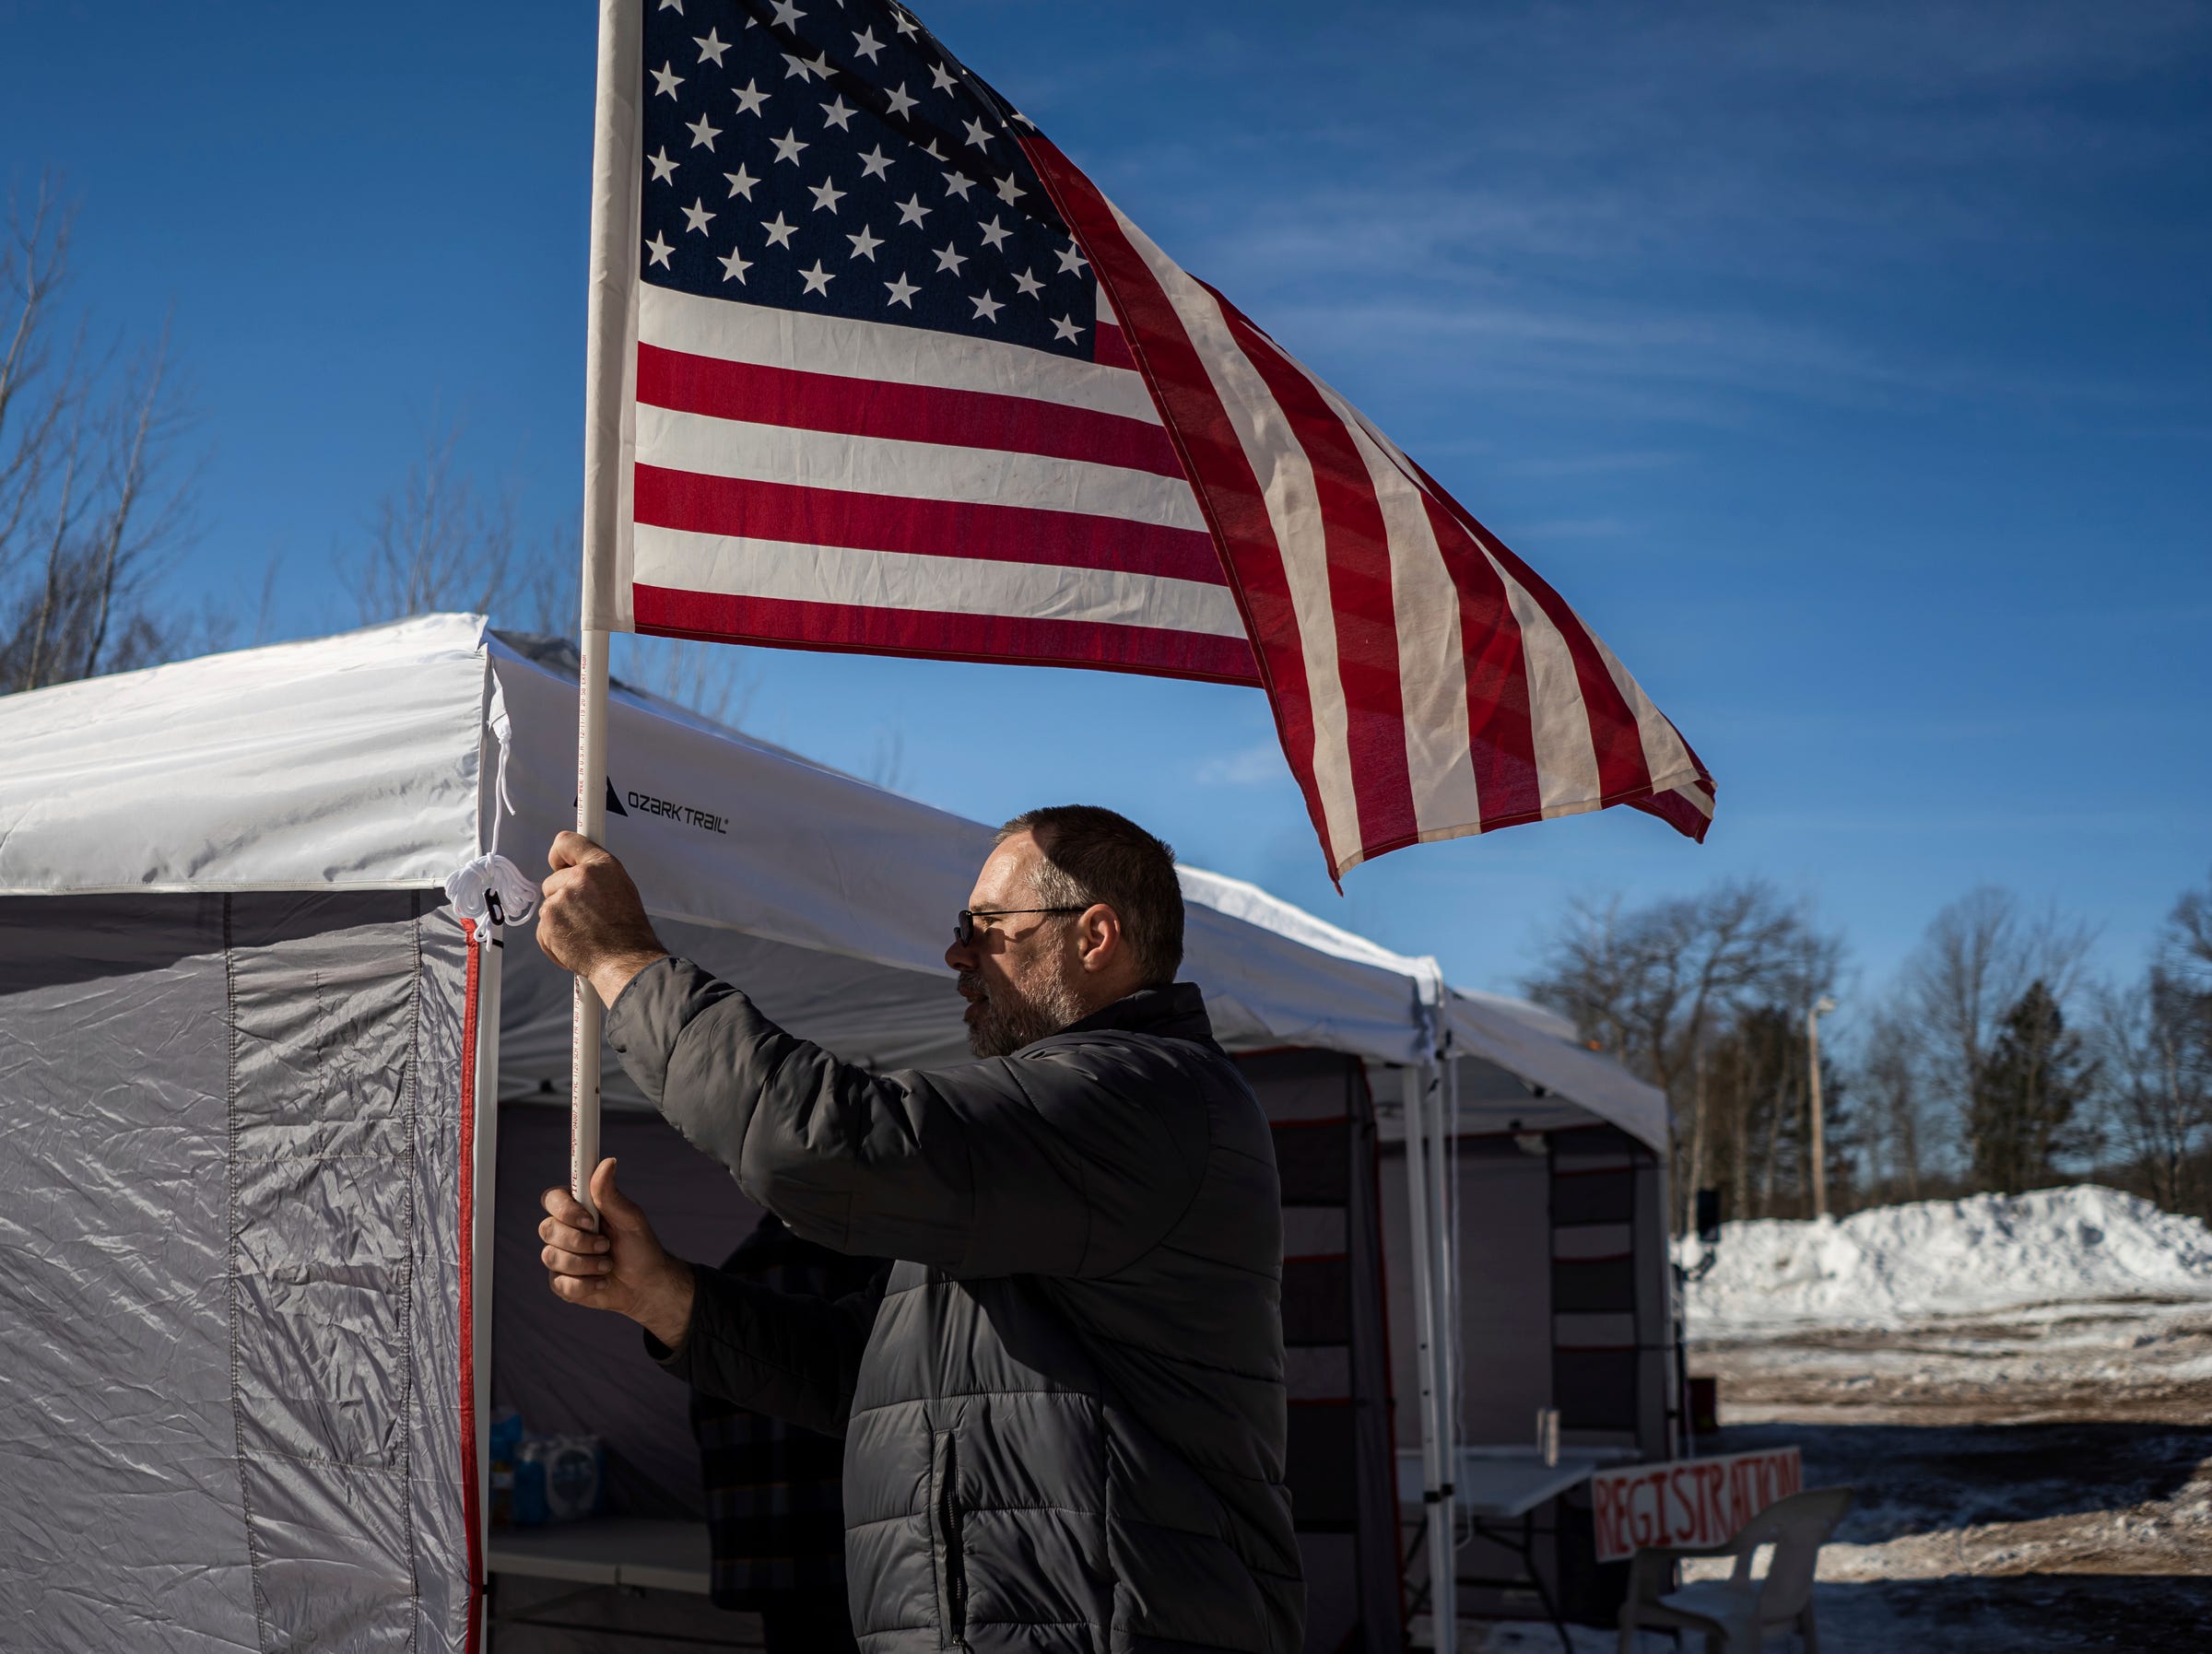 Ryan Lipinski moves to tie an American flag to a tent pole before the start of the annual K.I. Sawyer Cardboard Sled Races on Feb. 11, 2023. The disabled veteran organized the event to give kids on the former Air Force base something to do during the long U.P. winter.